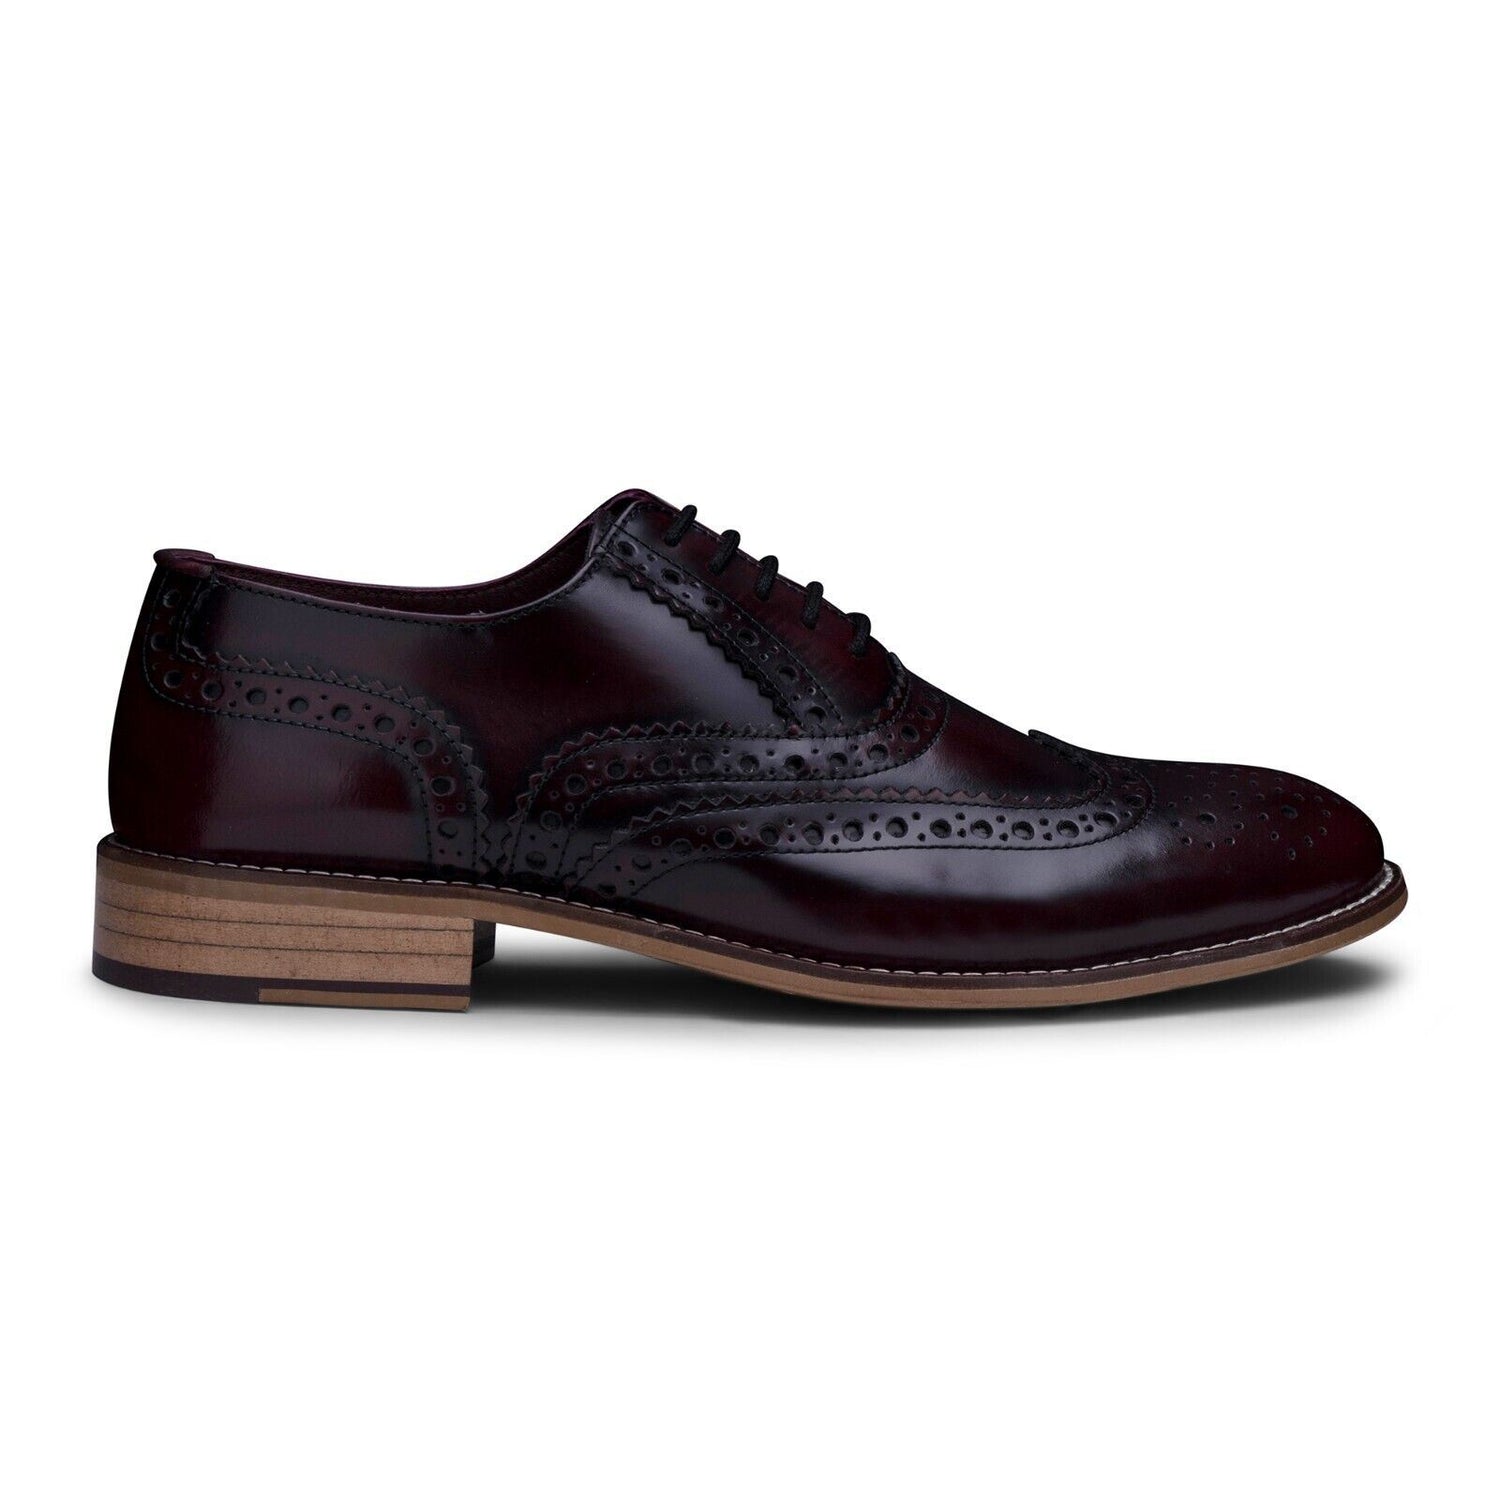 Mens Classic Oxford Maroon Leather Gatsby Brogue Shoes